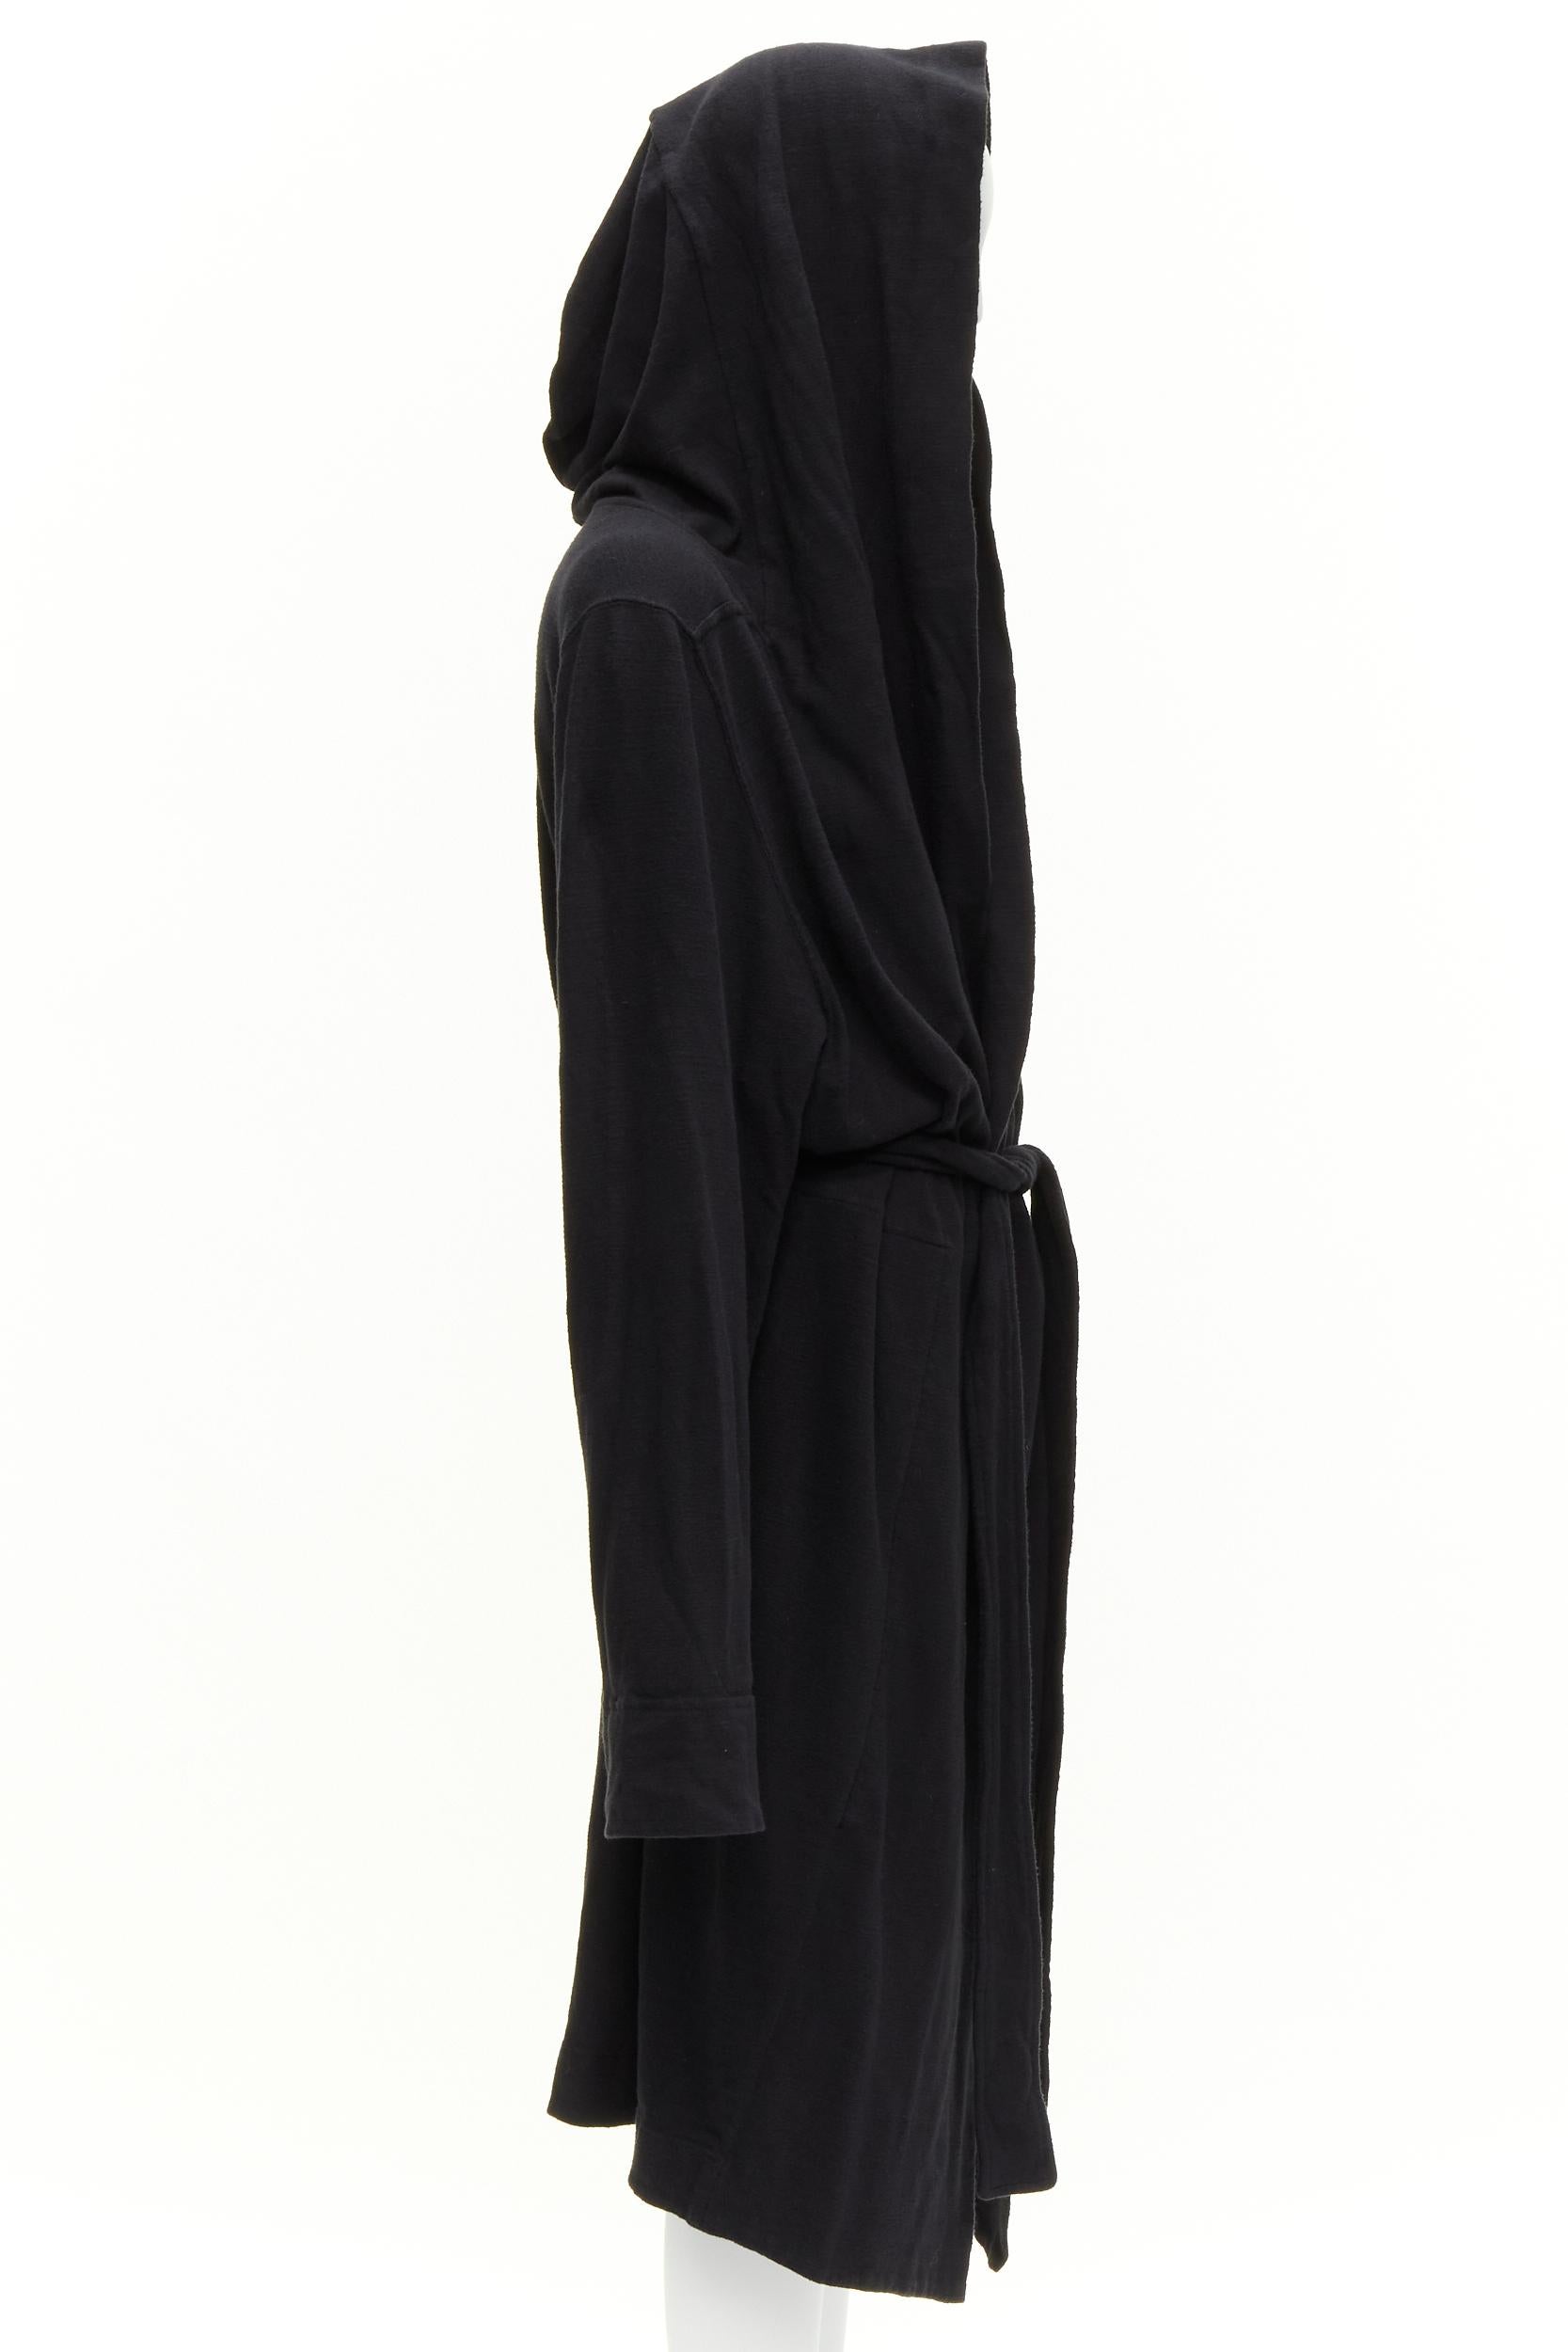 RICK OWENS DRKSHDW black cotton thick jersey hooded belted robe jacket S In Good Condition For Sale In Hong Kong, NT